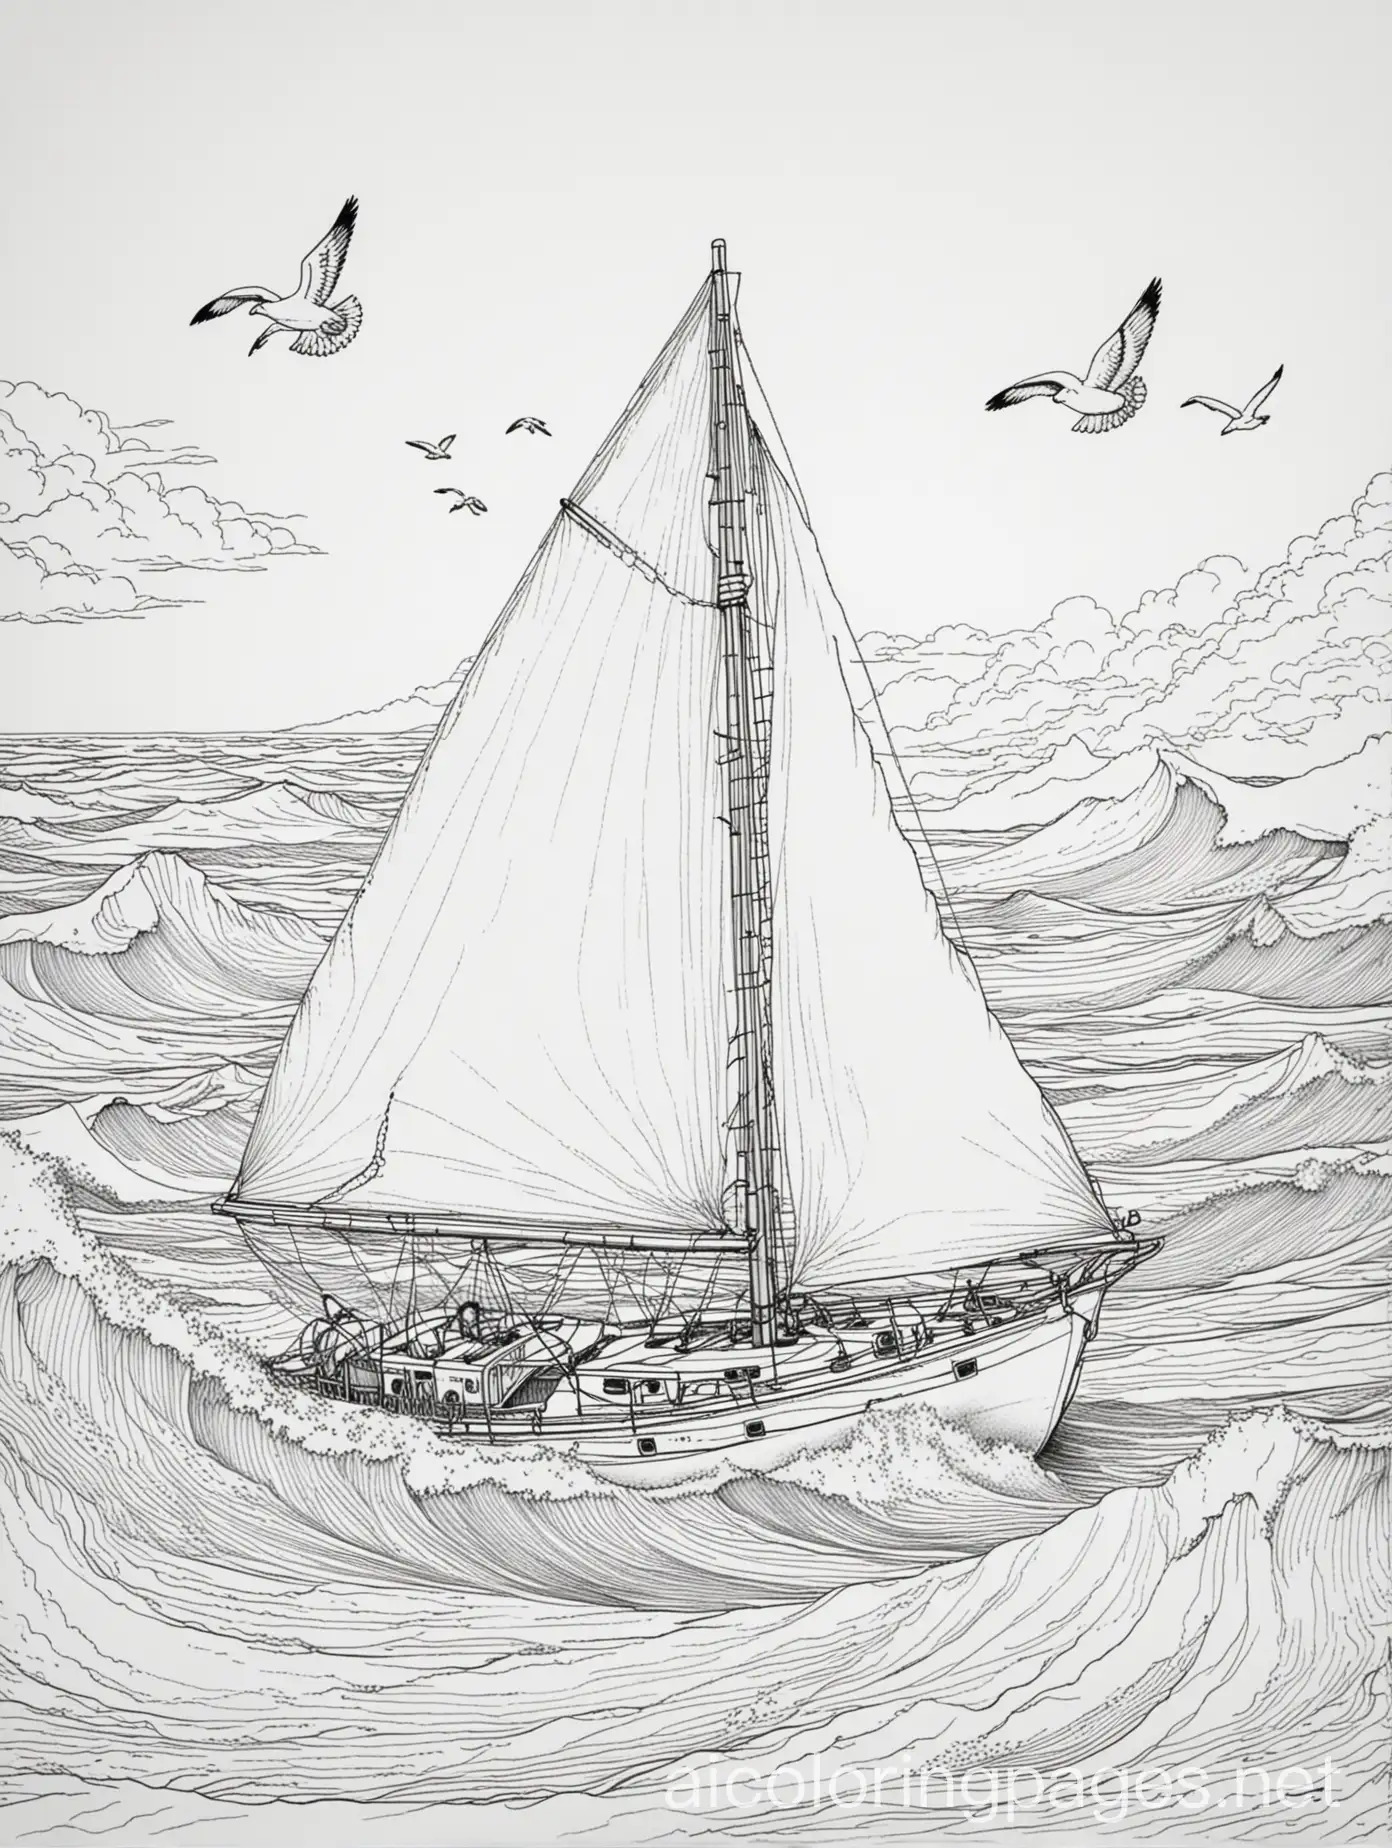 Sailing on the Ocean Coloring Page: Coloring Page, black and white, with waves, white background, some patters. The background of the coloring page is  with some details to make it easy for children 12 years old  to color within the lines. The outlines of a sailboat with waving sea and seagulls overhead too. , Coloring Page, black and white, line art, white background, Simplicity, Ample White Space. The background of the coloring page is plain white to make it easy for young children to color within the lines. The outlines of all the subjects are easy to distinguish, making it simple for kids to color without too much difficulty